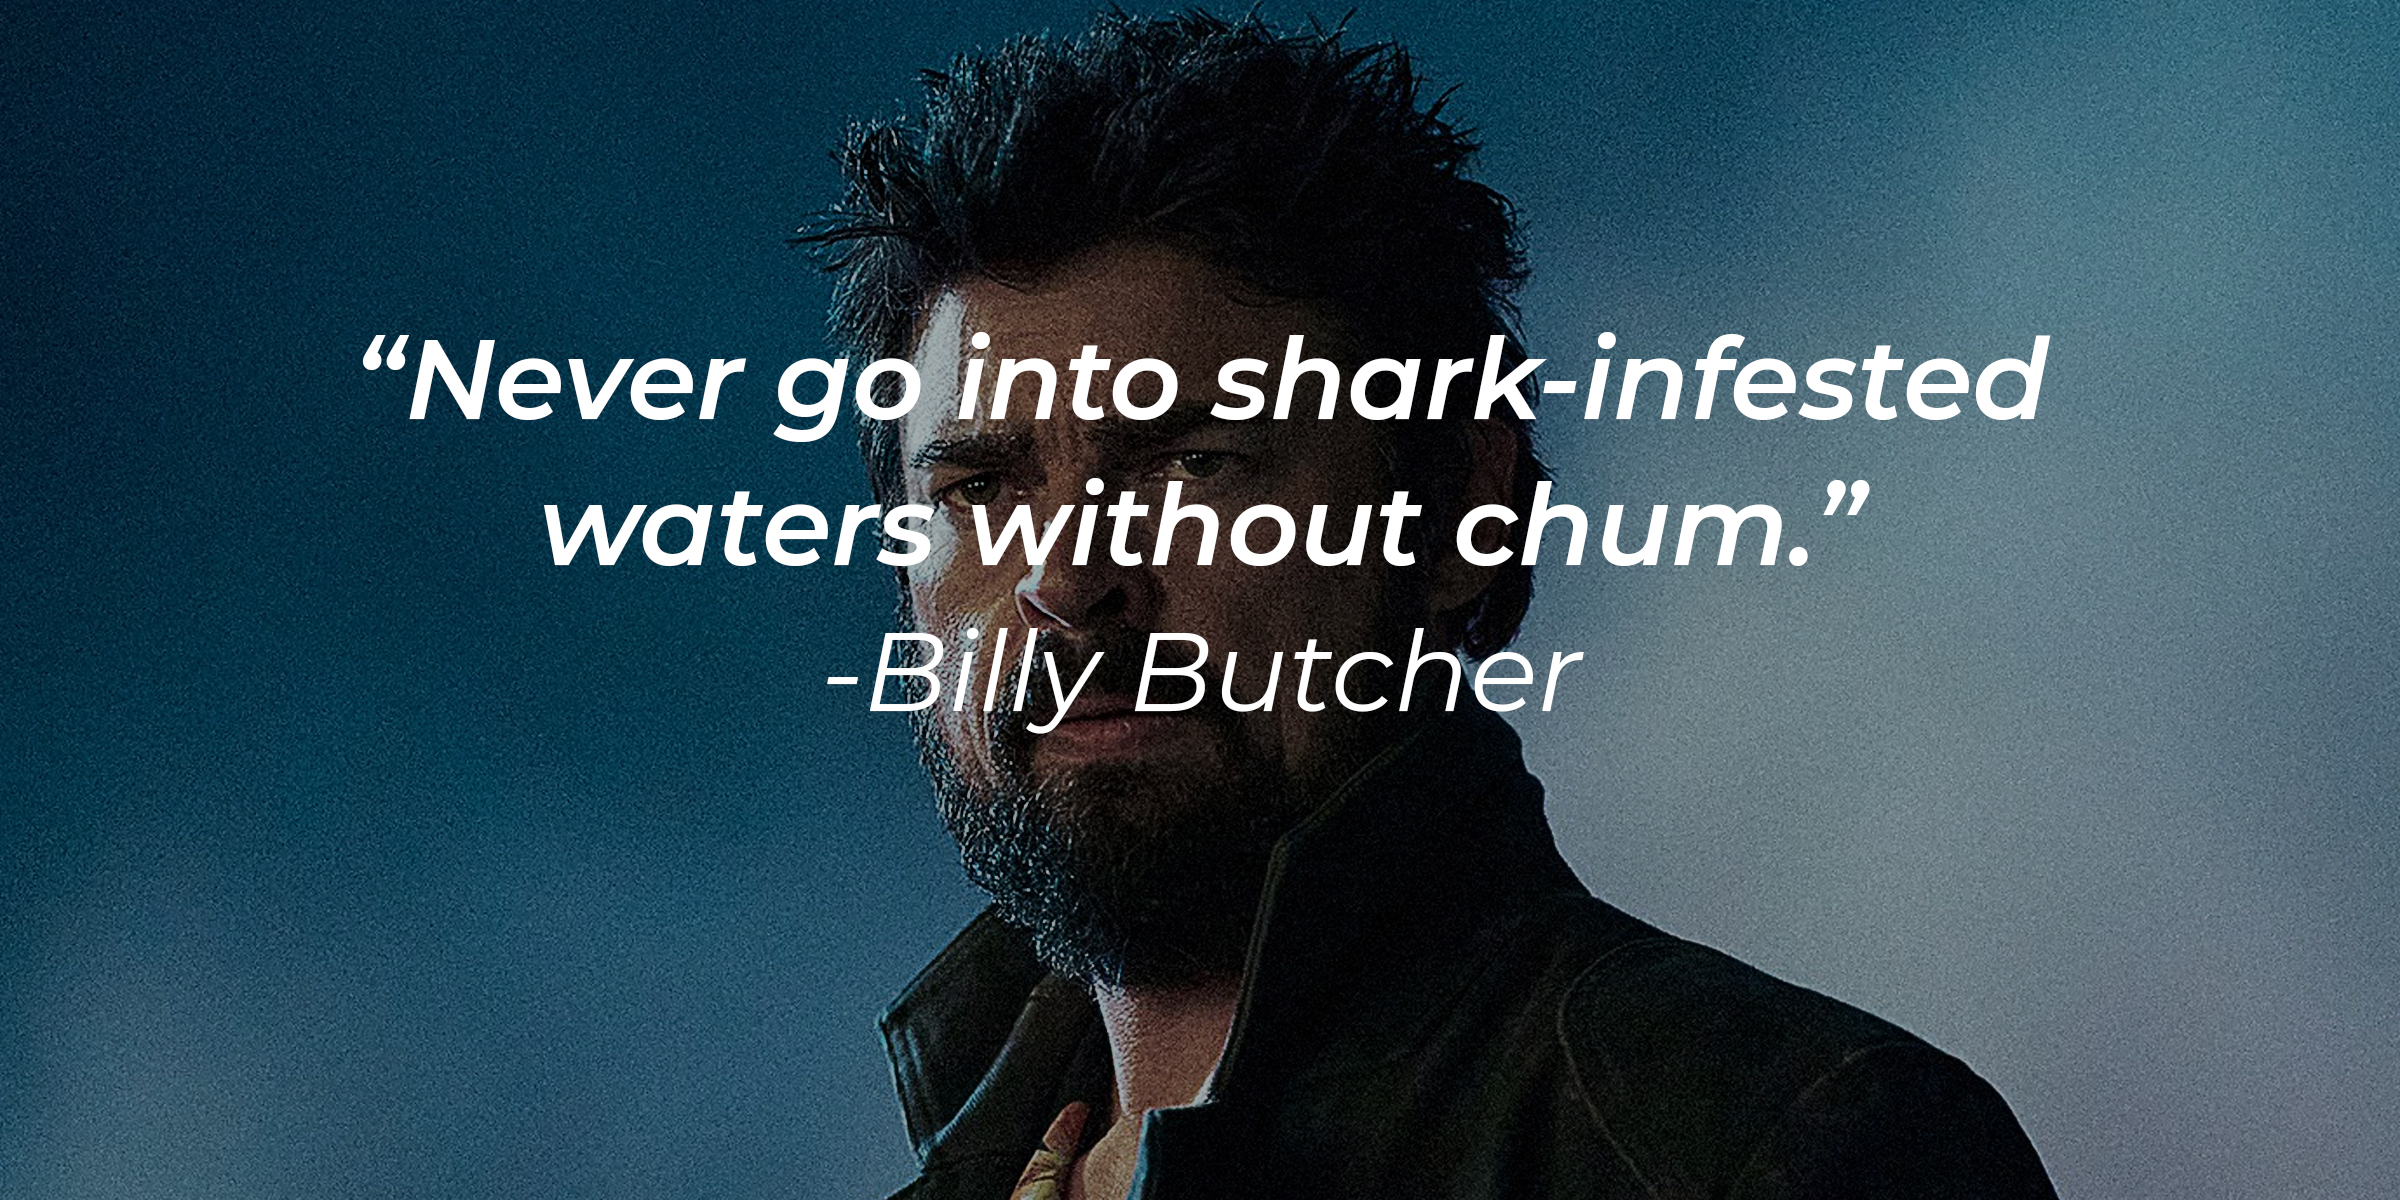 Billy Butcher's quote: "Never go into shark-infested waters without chum." | Source: Facebook.com/TheBoysTV